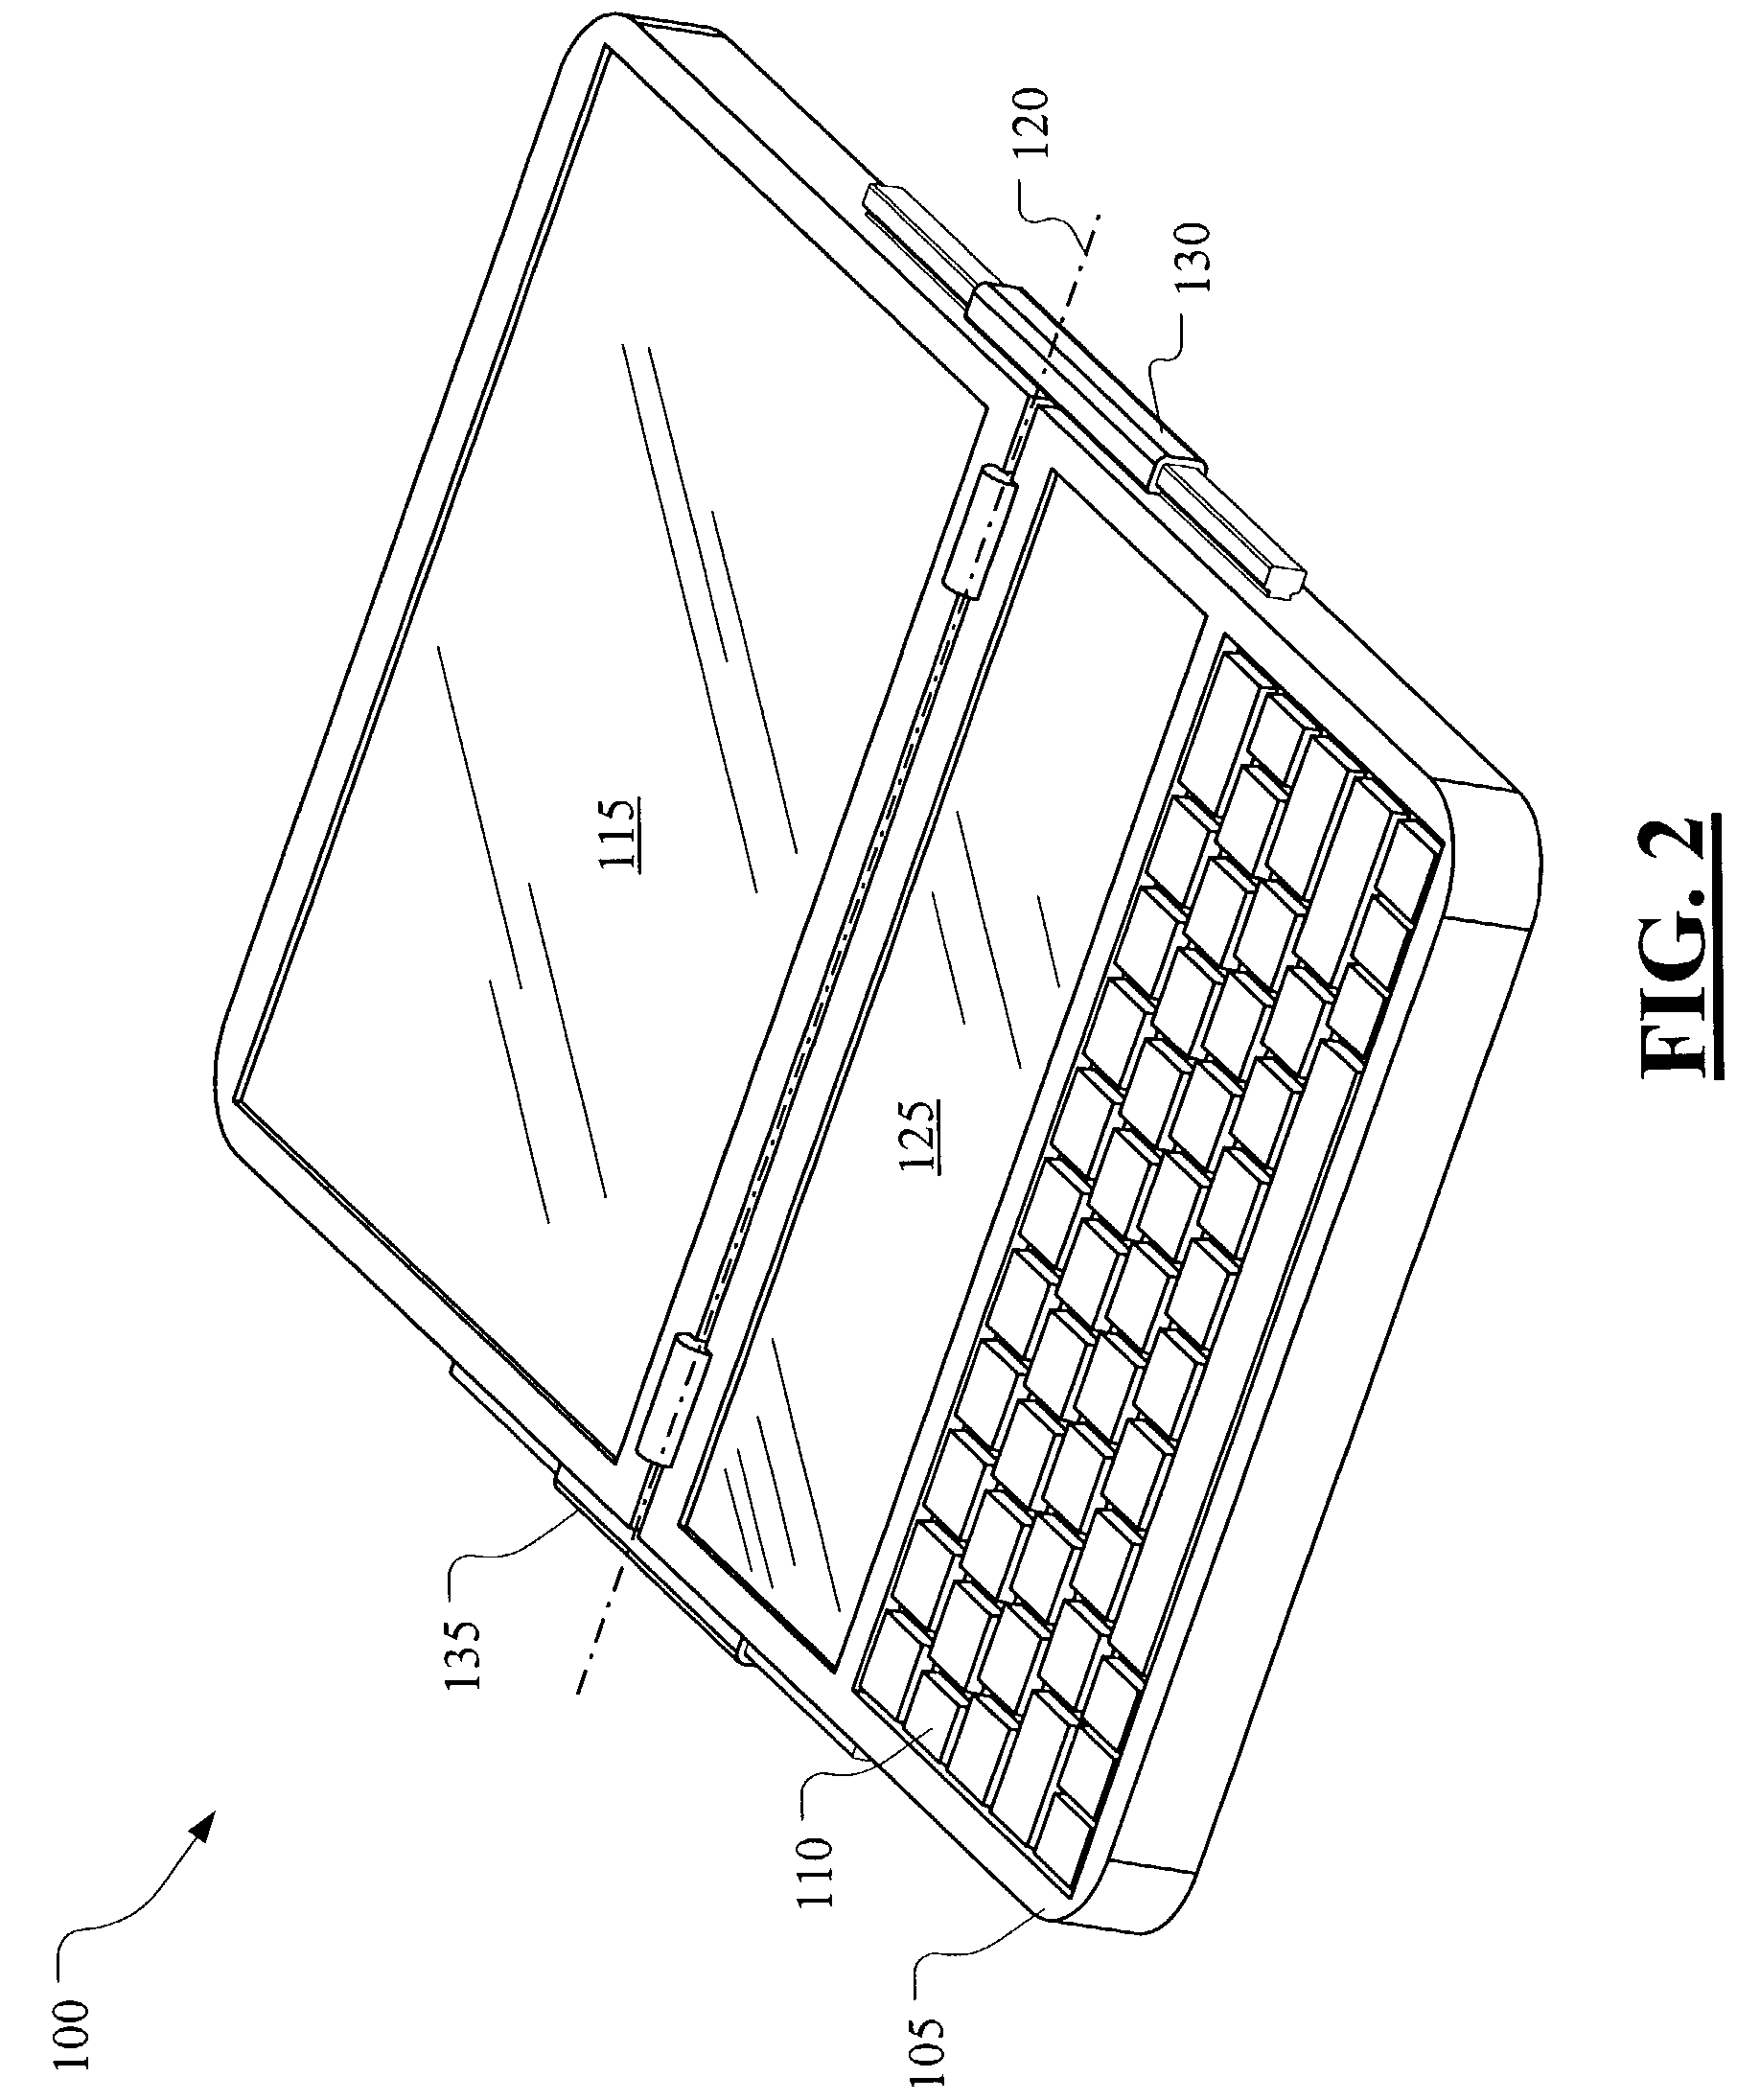 Folding terminal with slider to fix terminal in a flat unfolded configuration